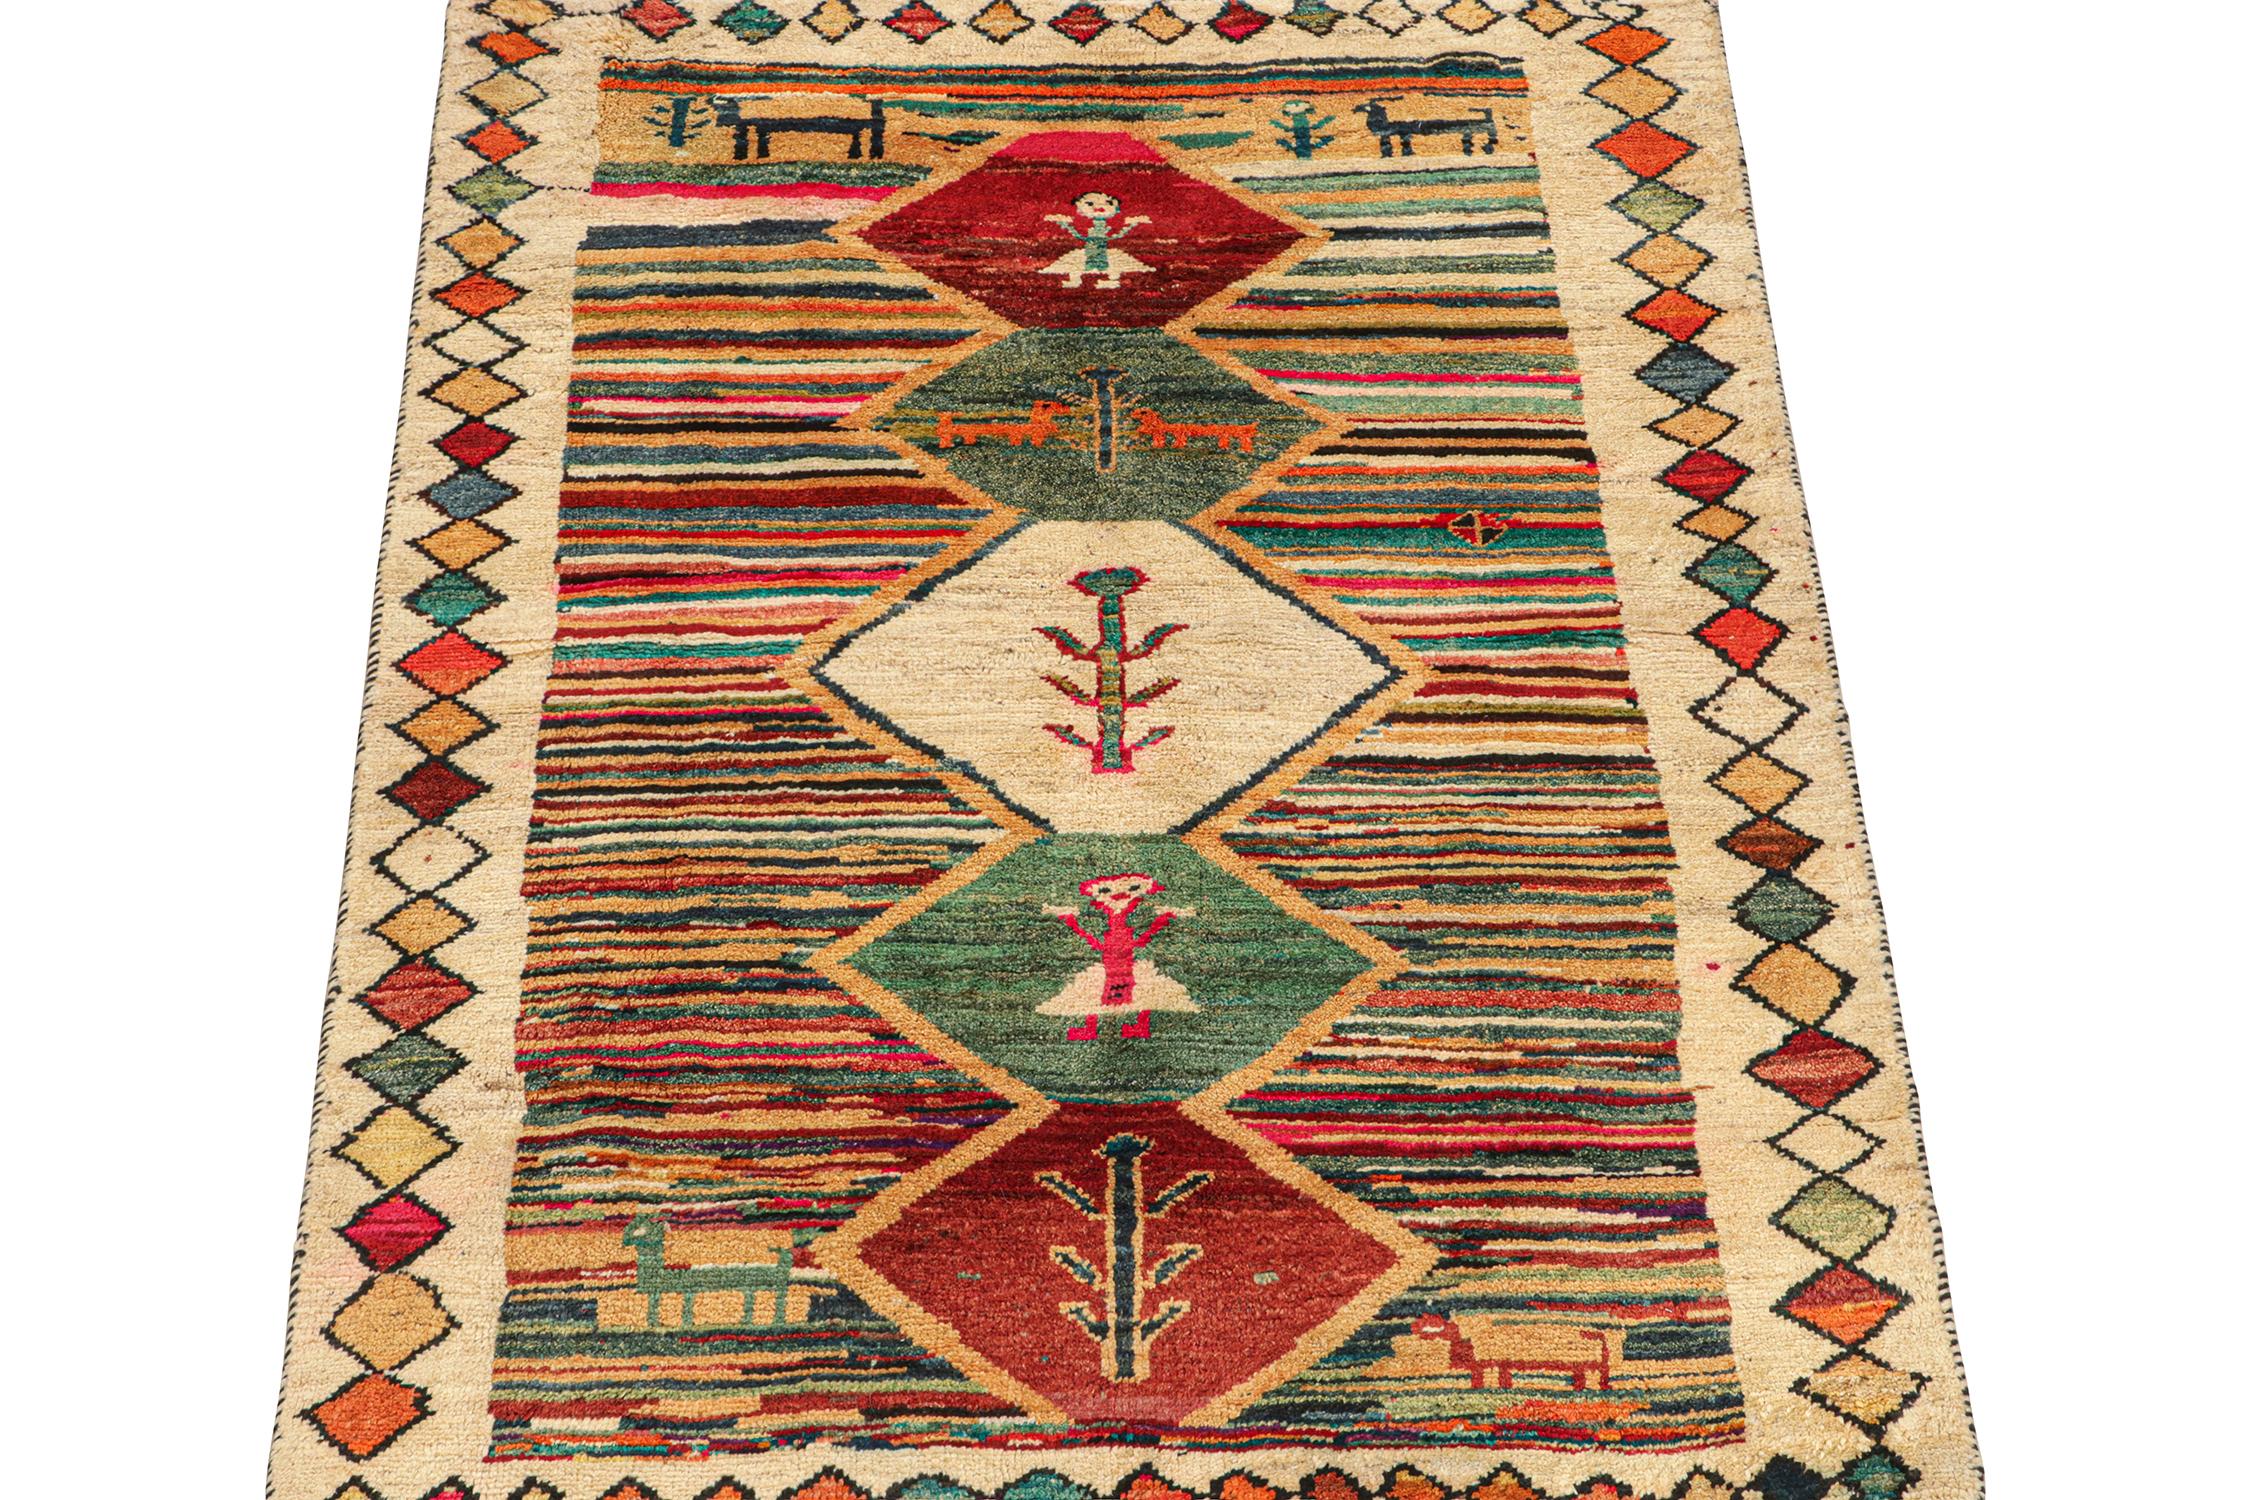 This vintage 4x6 Persian tribal runner is hand-knotted in wool, and originates circa 1950-1960.

On the Design:

The design enjoys a polychromatic field and medallion patterns with pictorial figures that depict primitivist human and animal